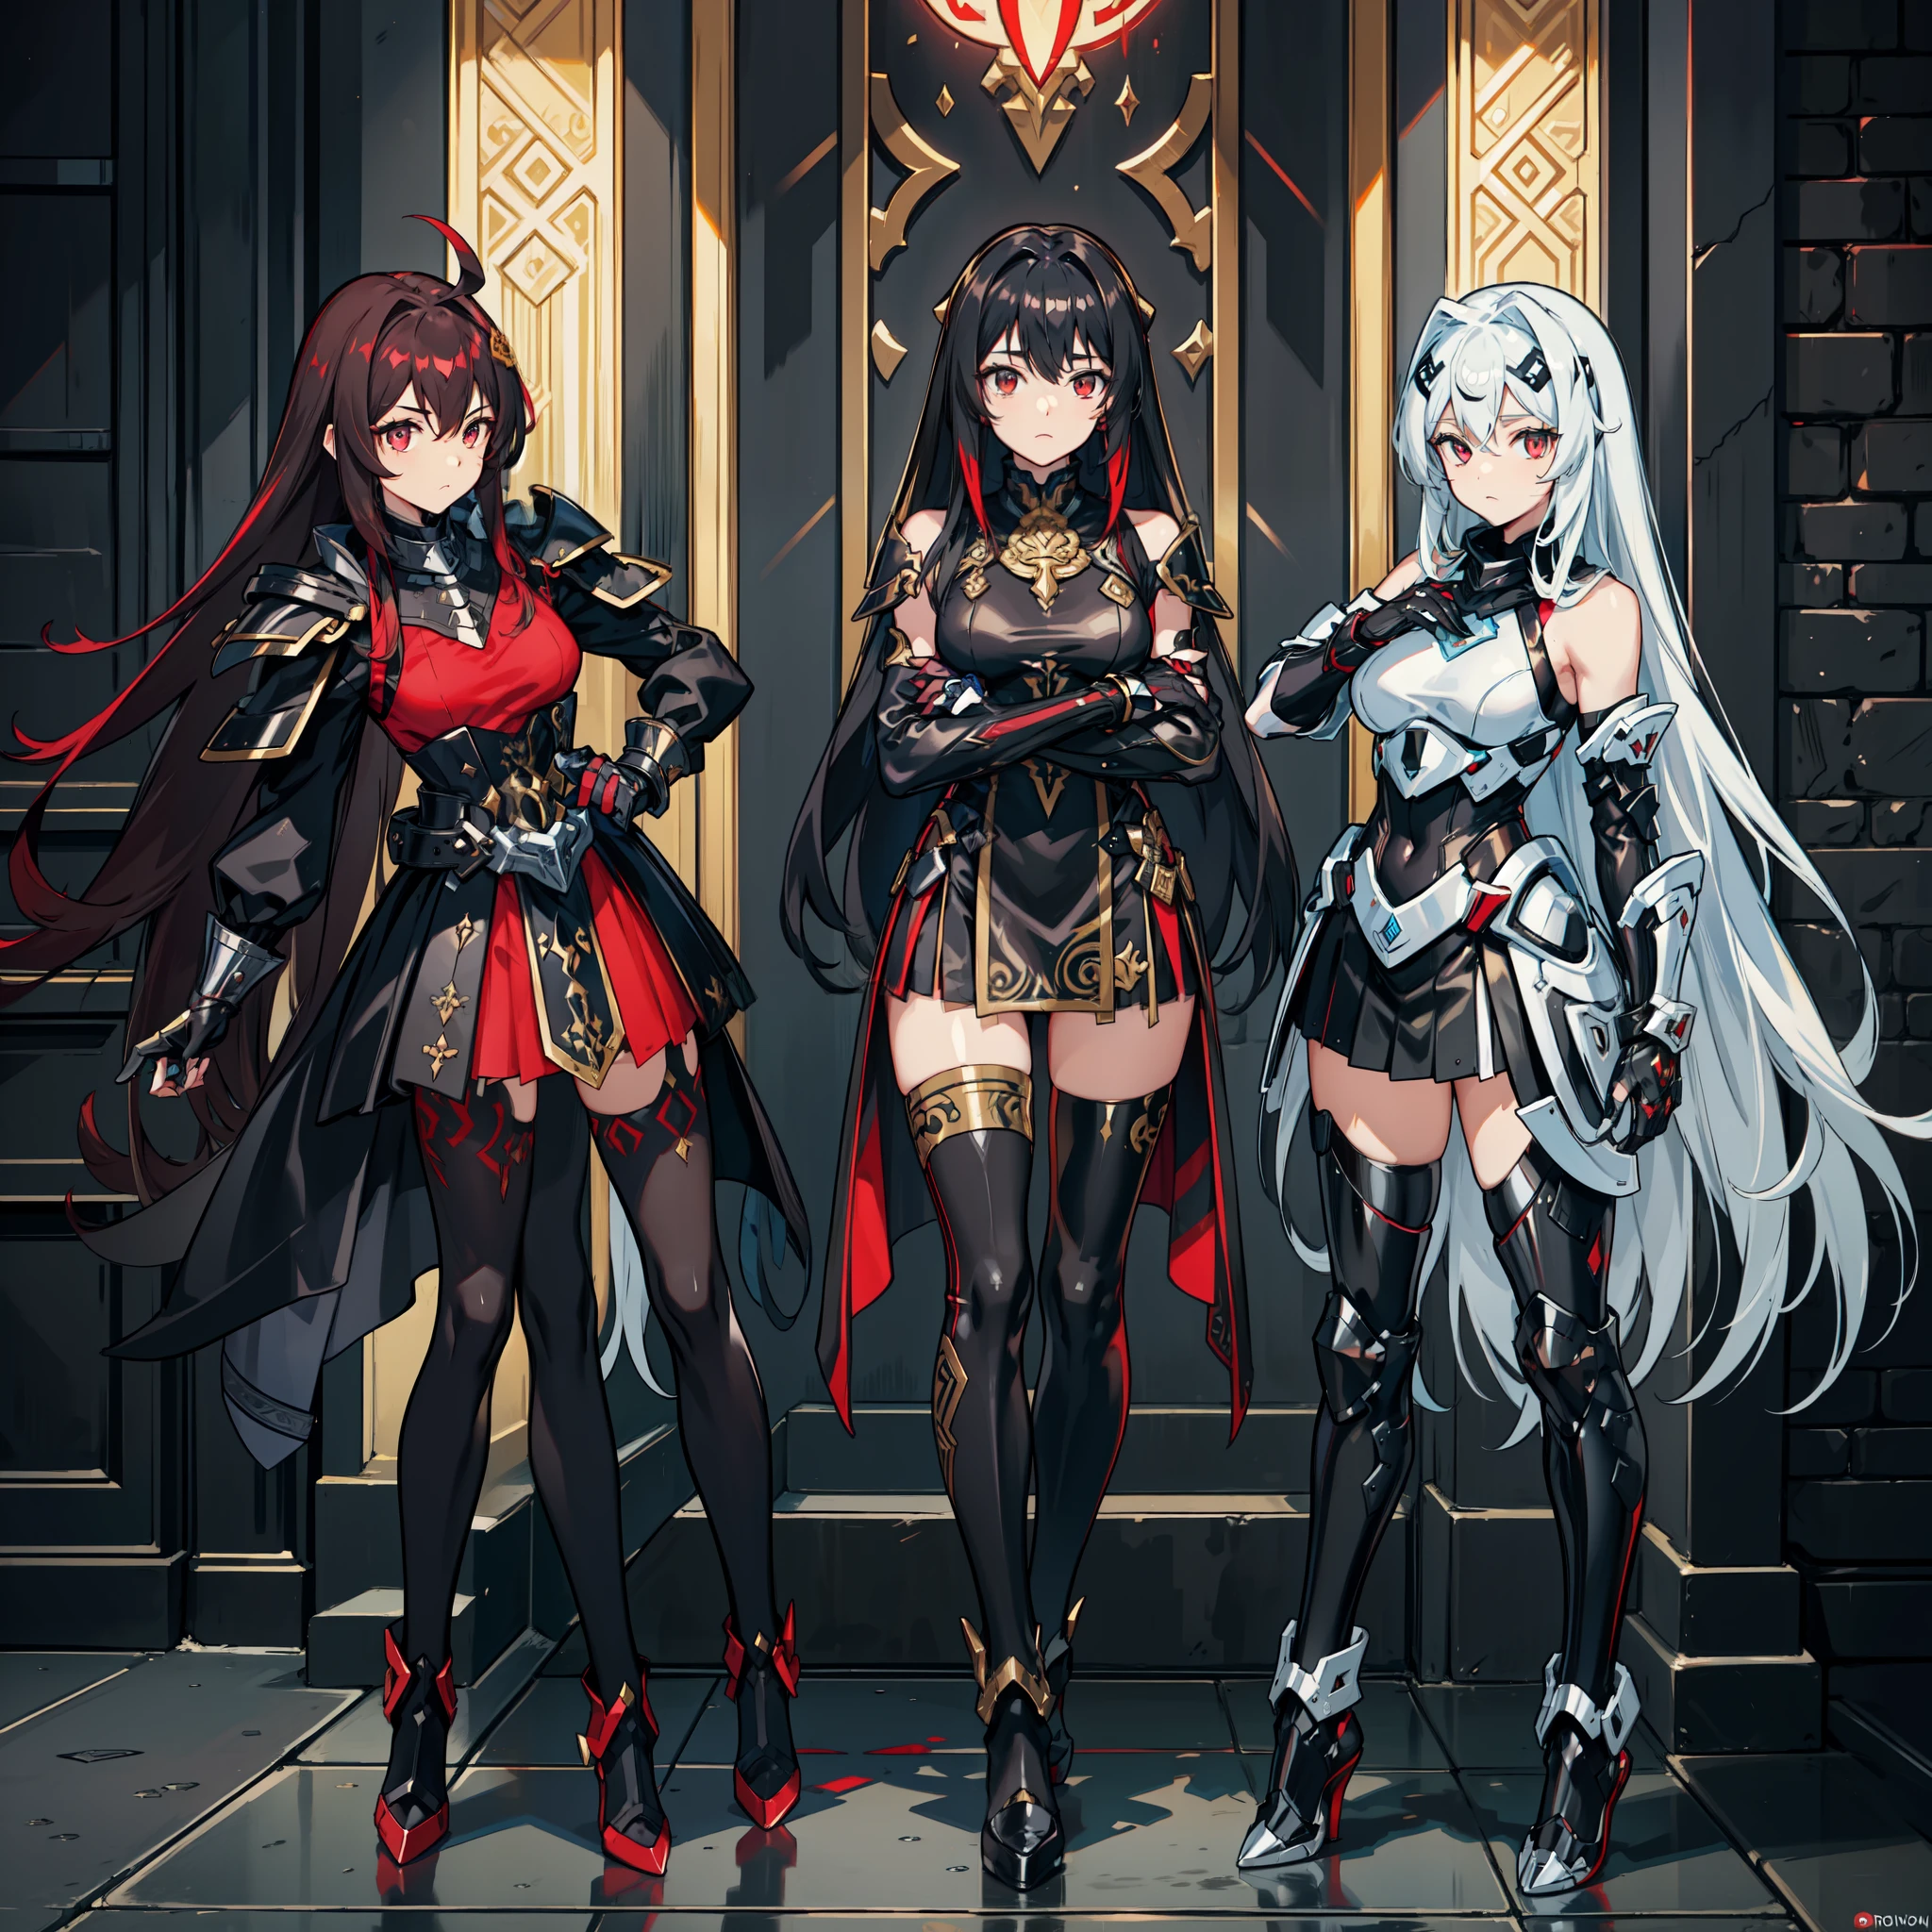 3 girls(((fully body))), standingn, many clothes, from head to toe (((three personagem))), Female One, (((darkskin))), a mix of technology and tribal, Black hair with ponytail, Light Blue Eyes, and the Light Blue frame, ((Black Metallic Gauntlets and Greaves with Red and Silver Highlights)), (((The clothes have a mix of modern and tribal))), having the majority of the color black, but having parts in red, Shoulders on Display, On the hip, a short that extends to mid-thigh in black, fully body.